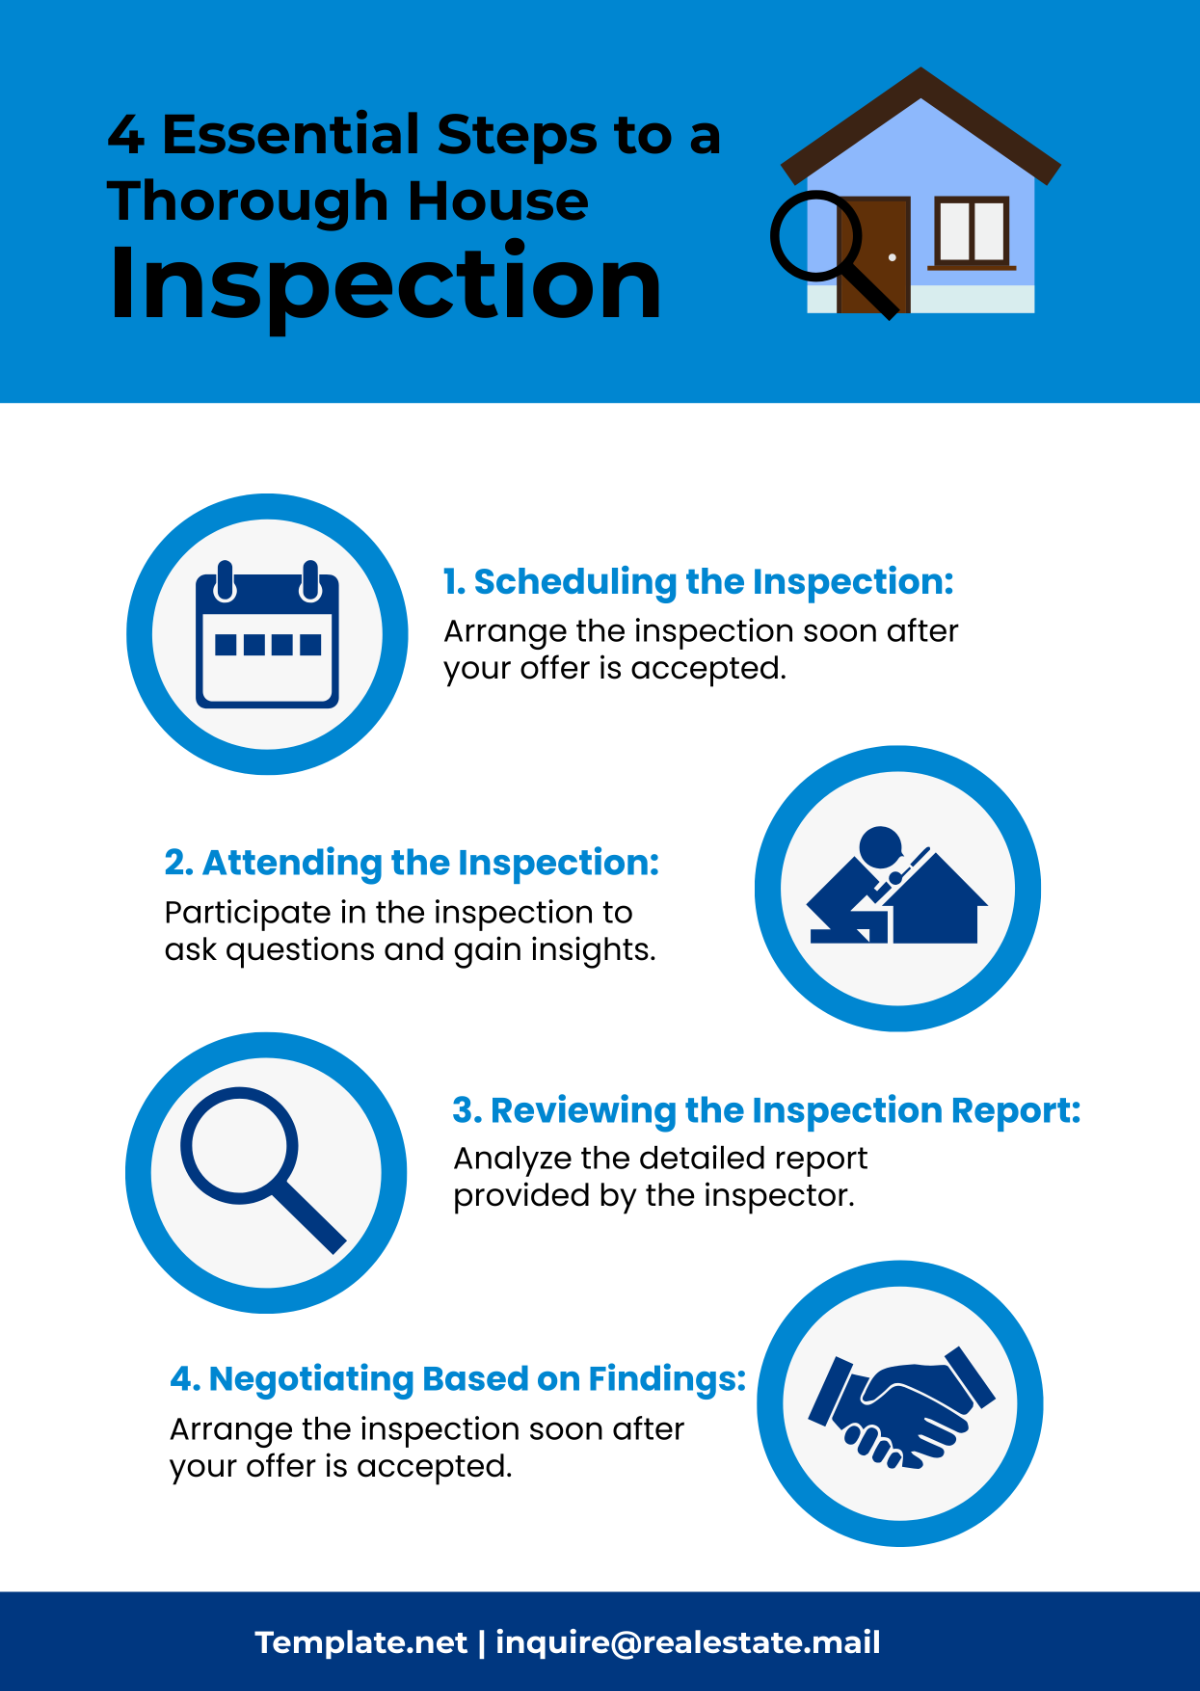 Free Real Estate House Inspection Process Infographic Template